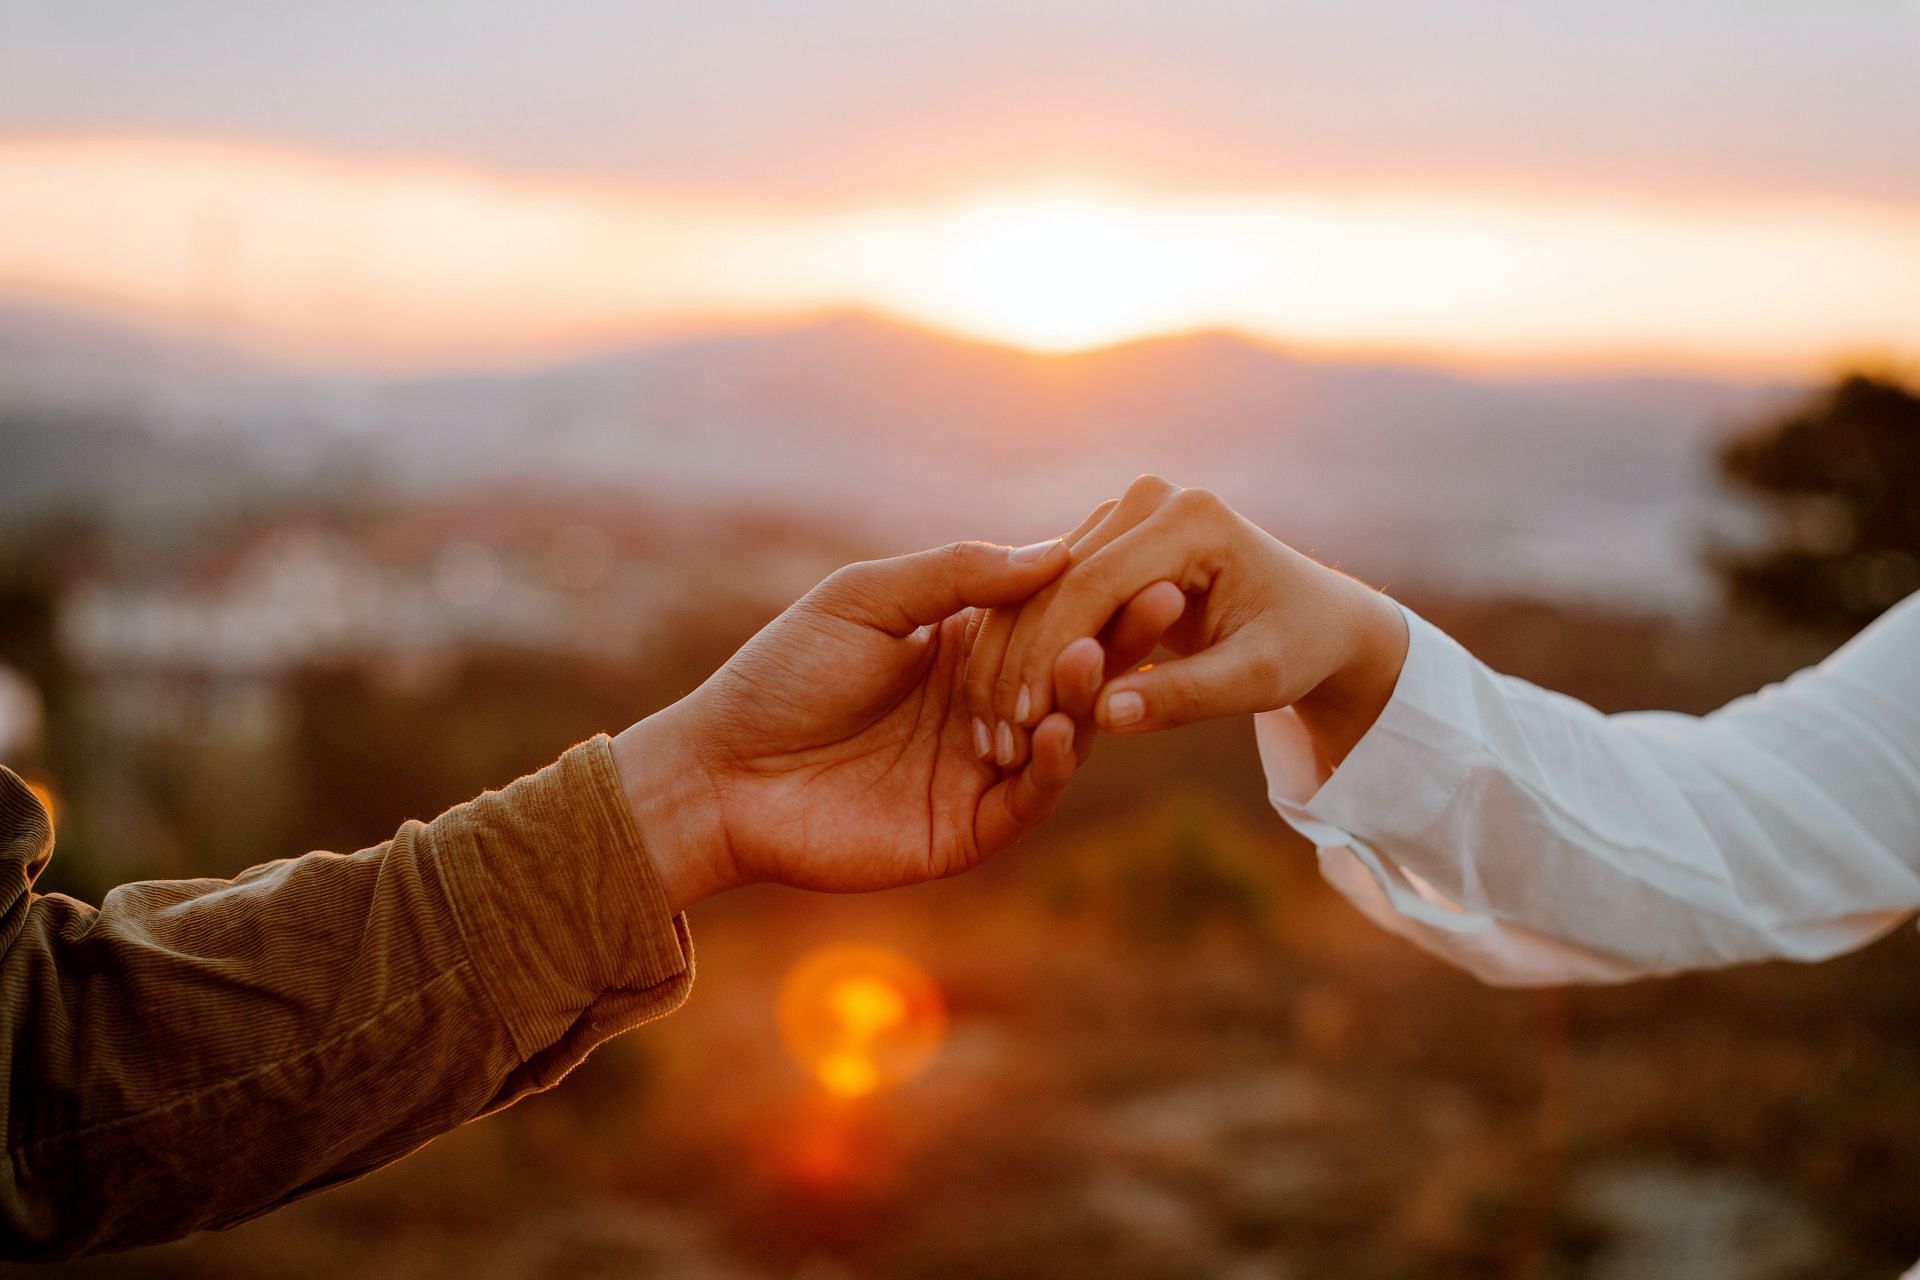 Connection with your depressed partner involves talking to them. (Image via Pexels/Trung Nguyen)